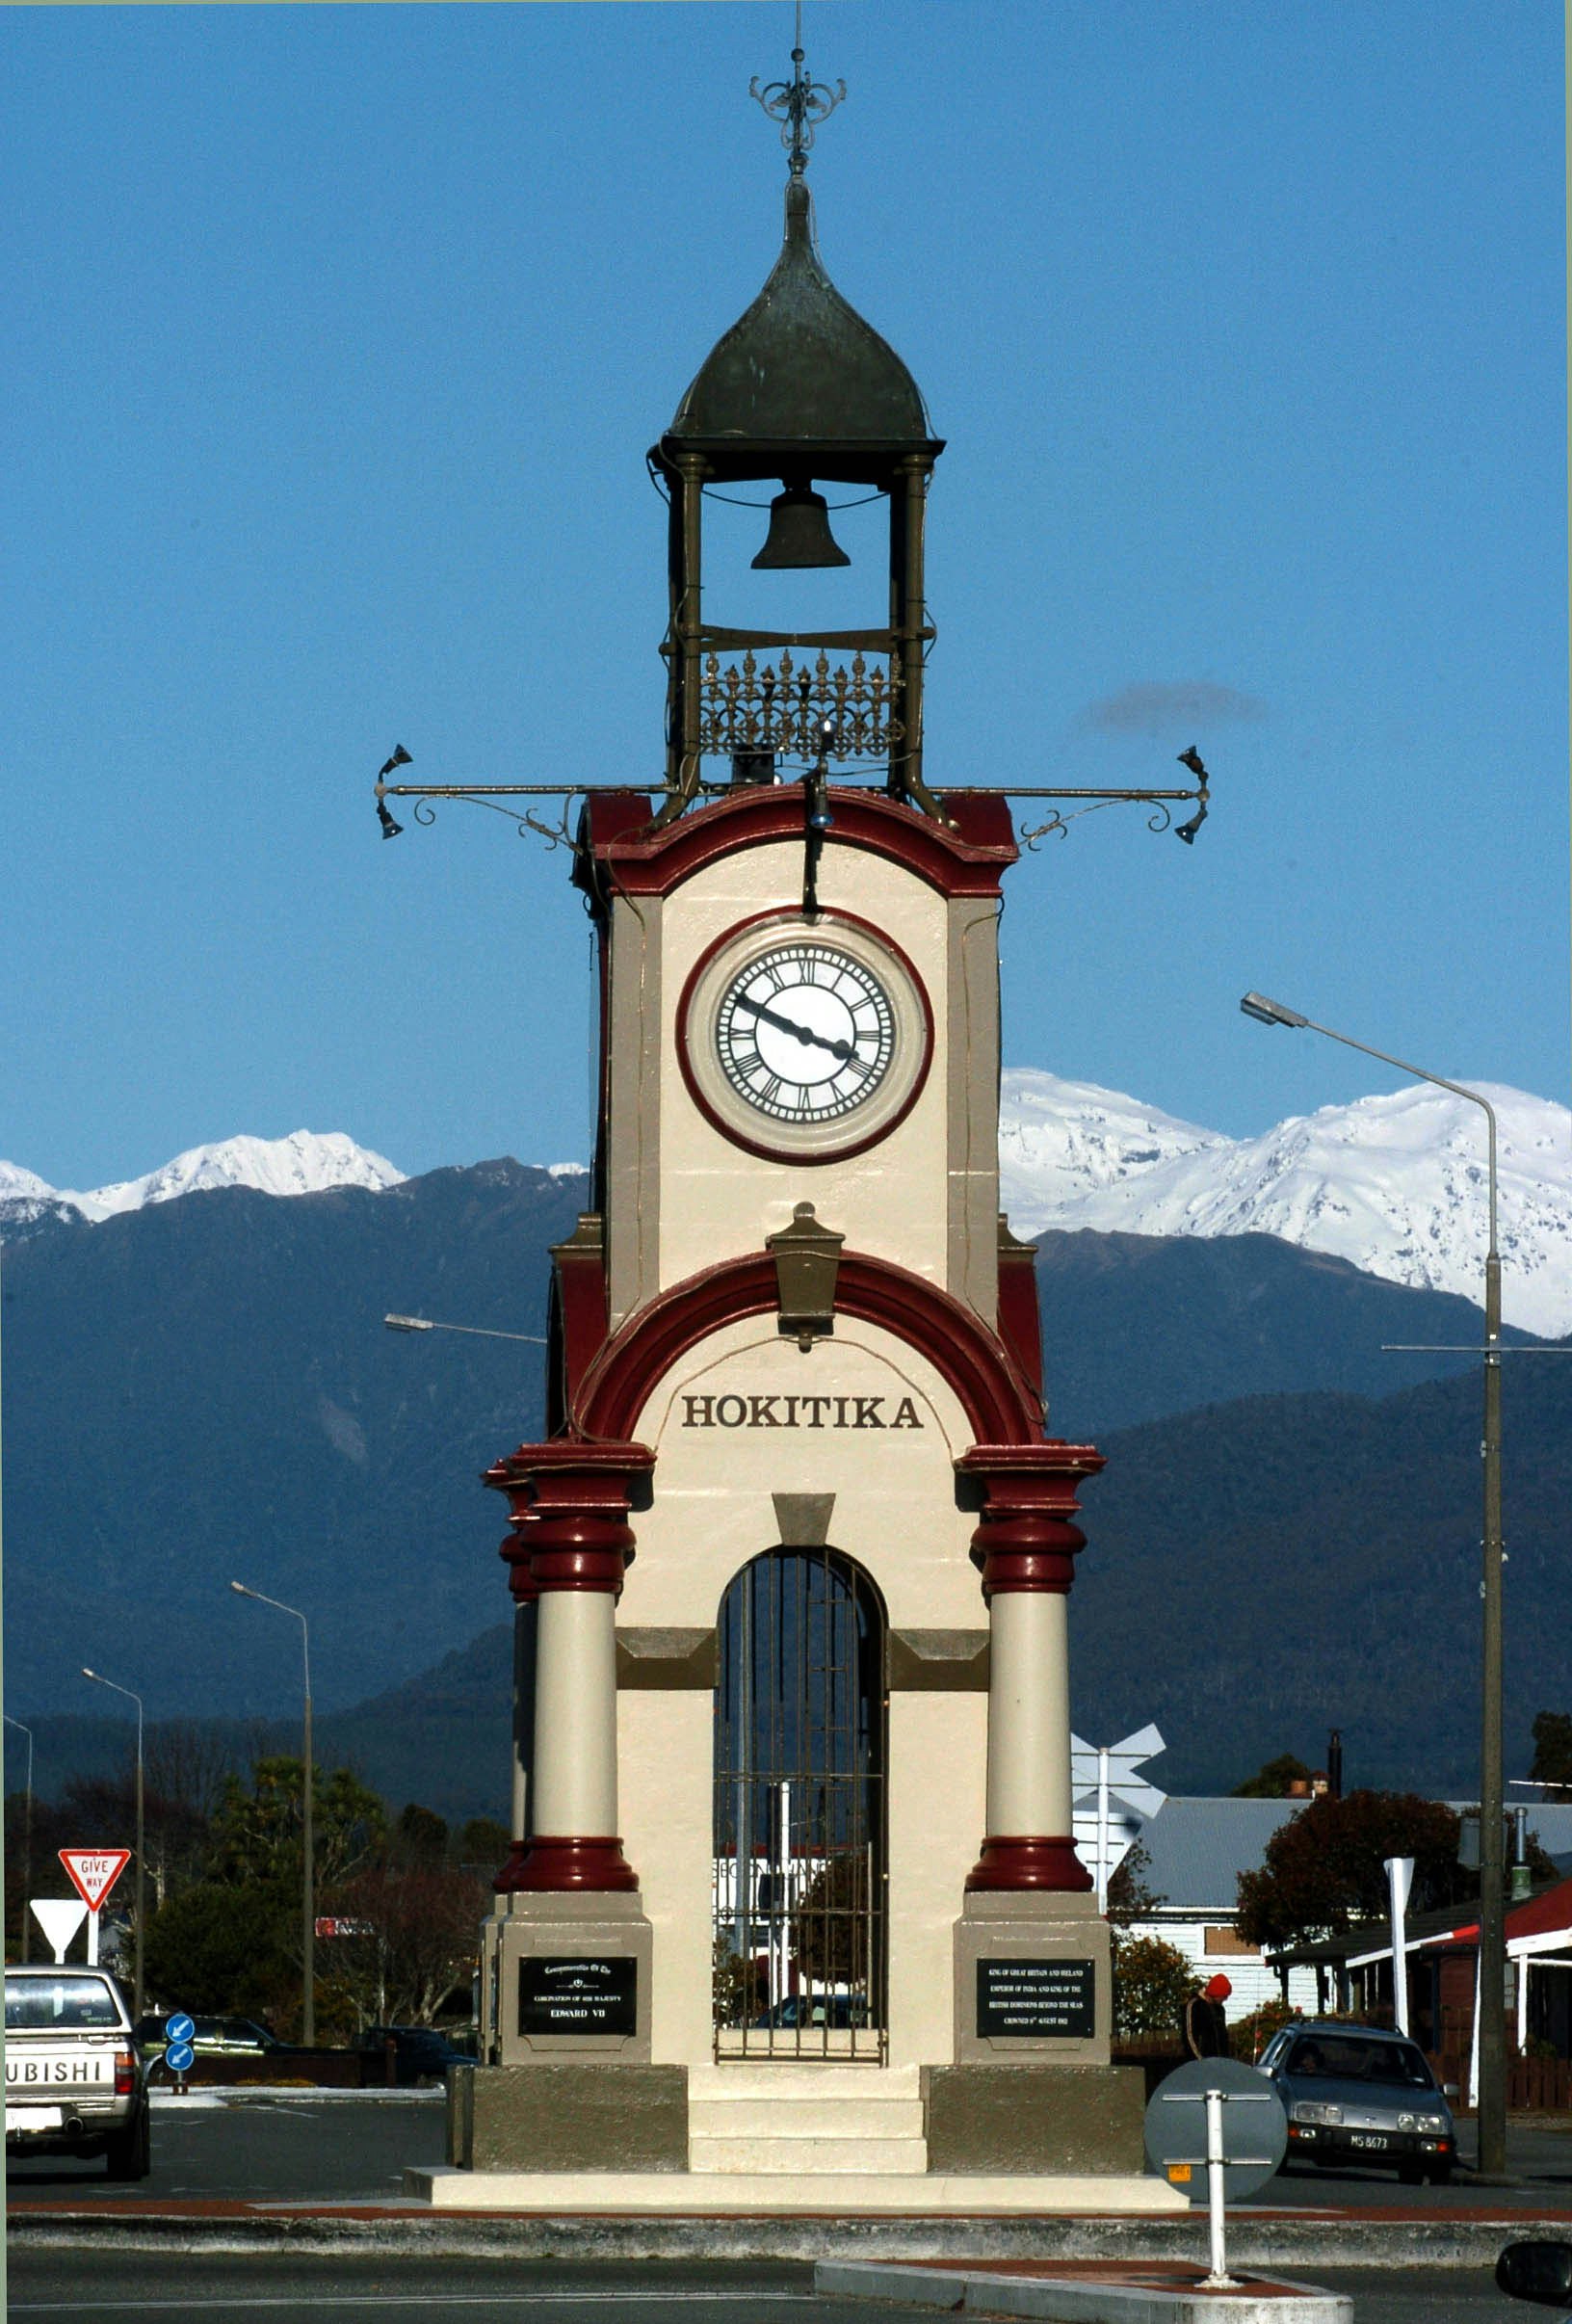 Hokitika is renowned for its natural beauty